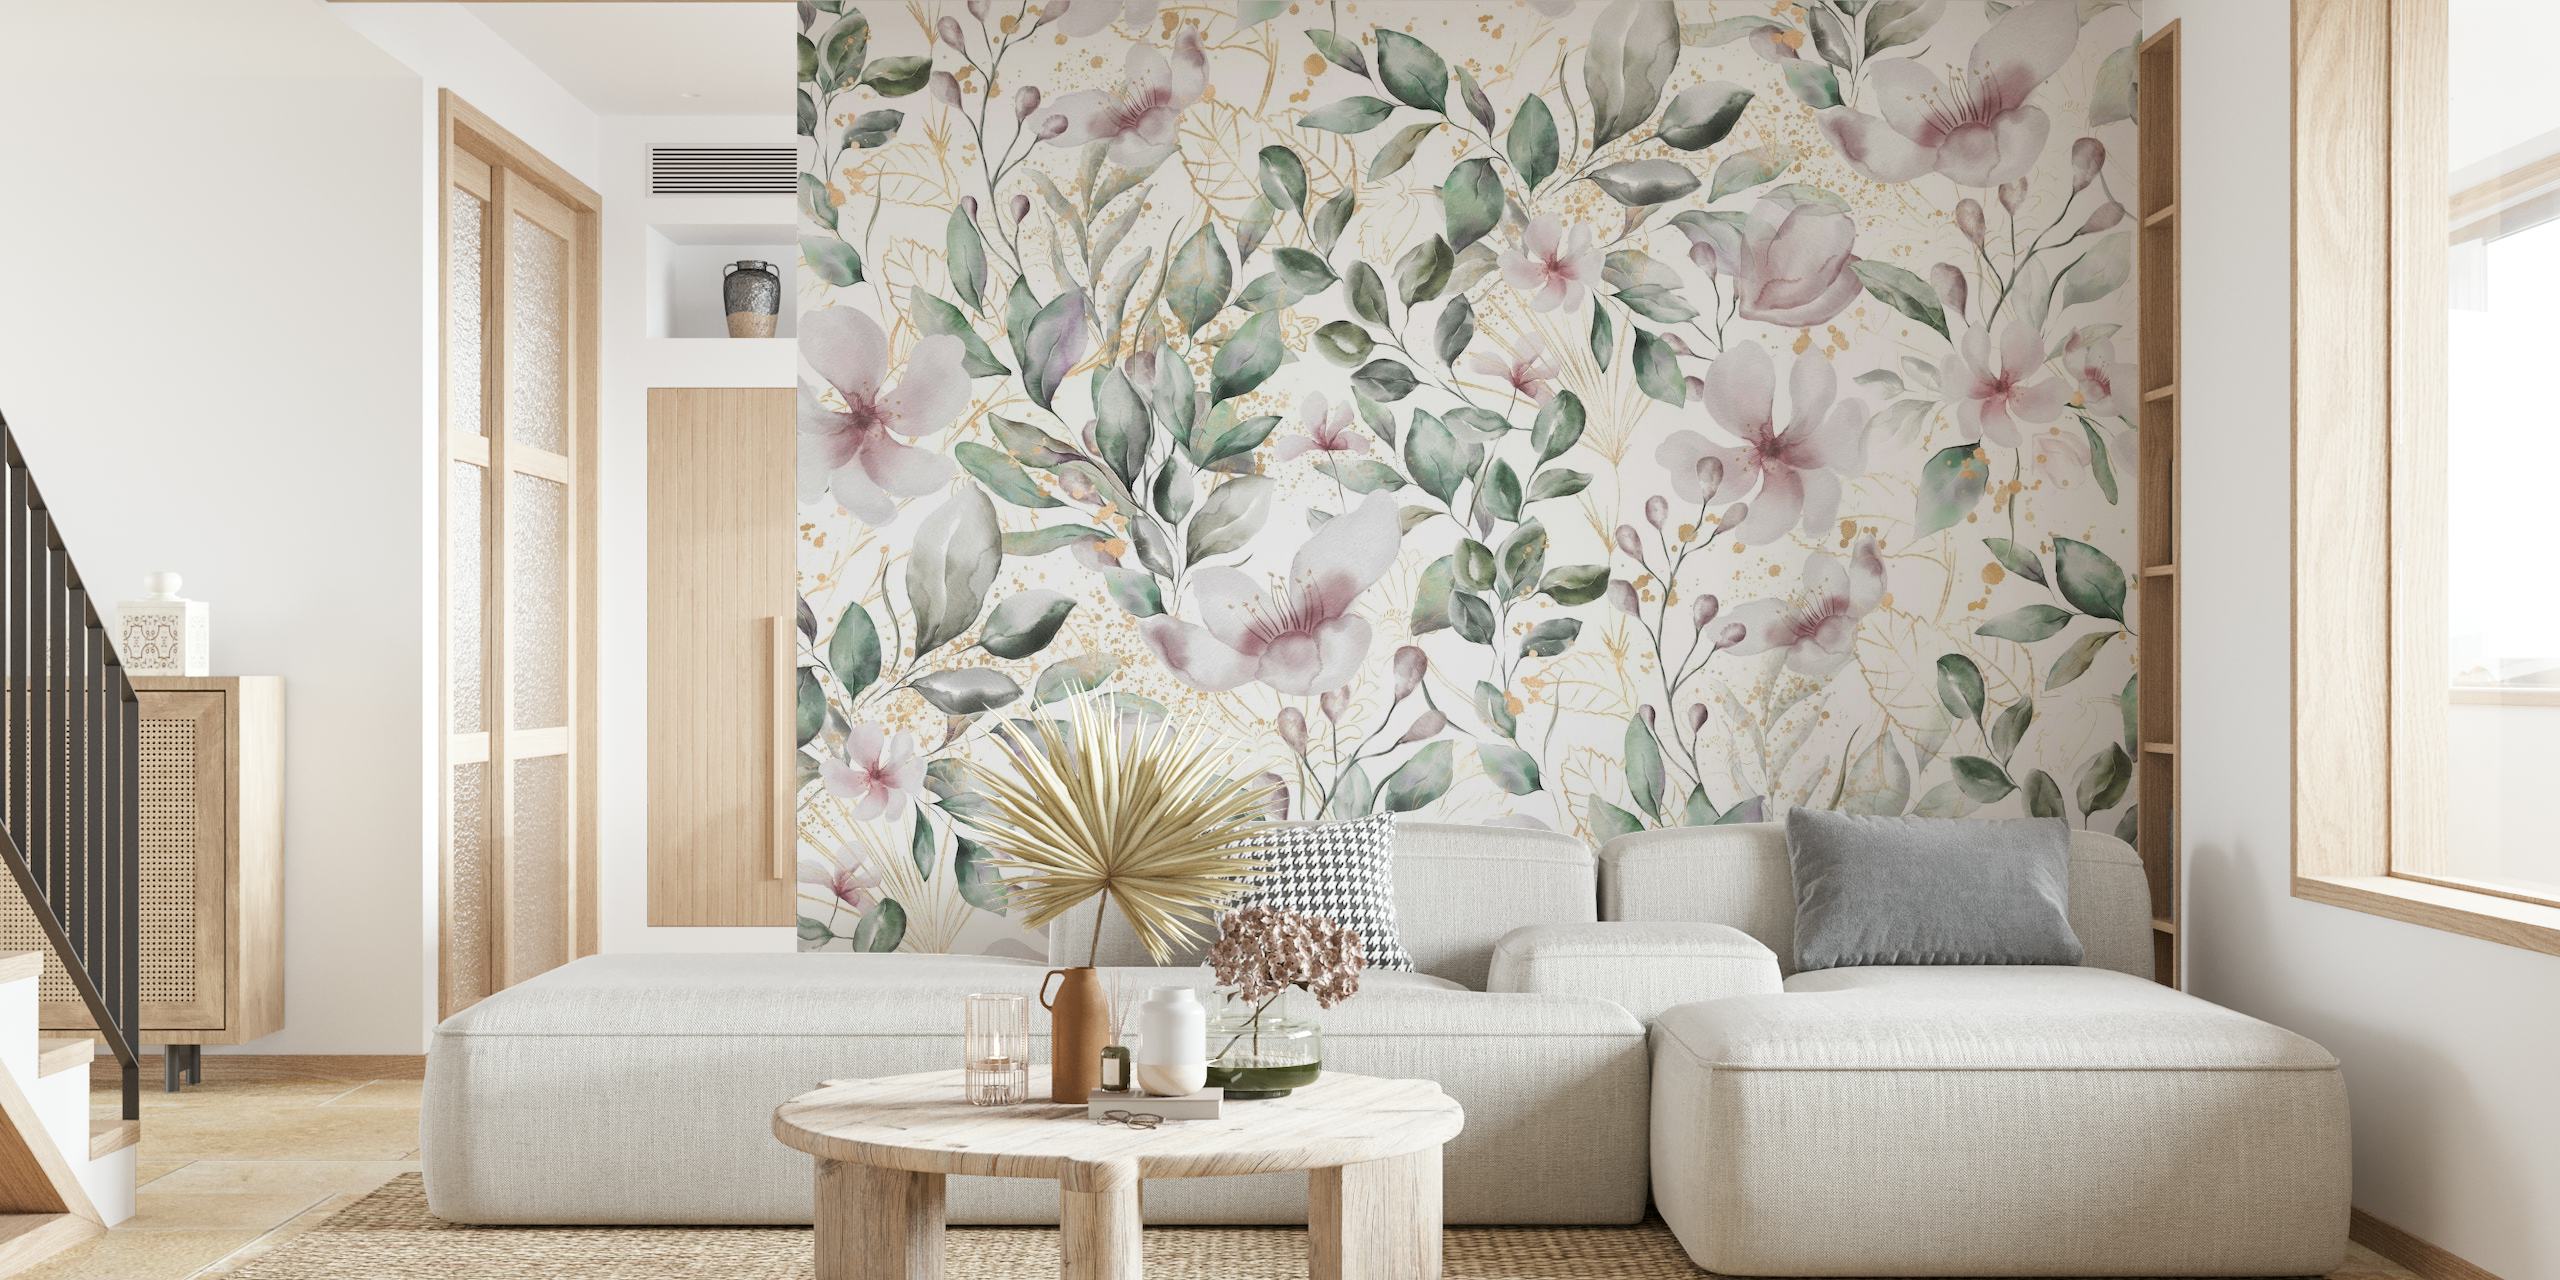 Magnolia Watercolor On White wall mural with soft floral patterns